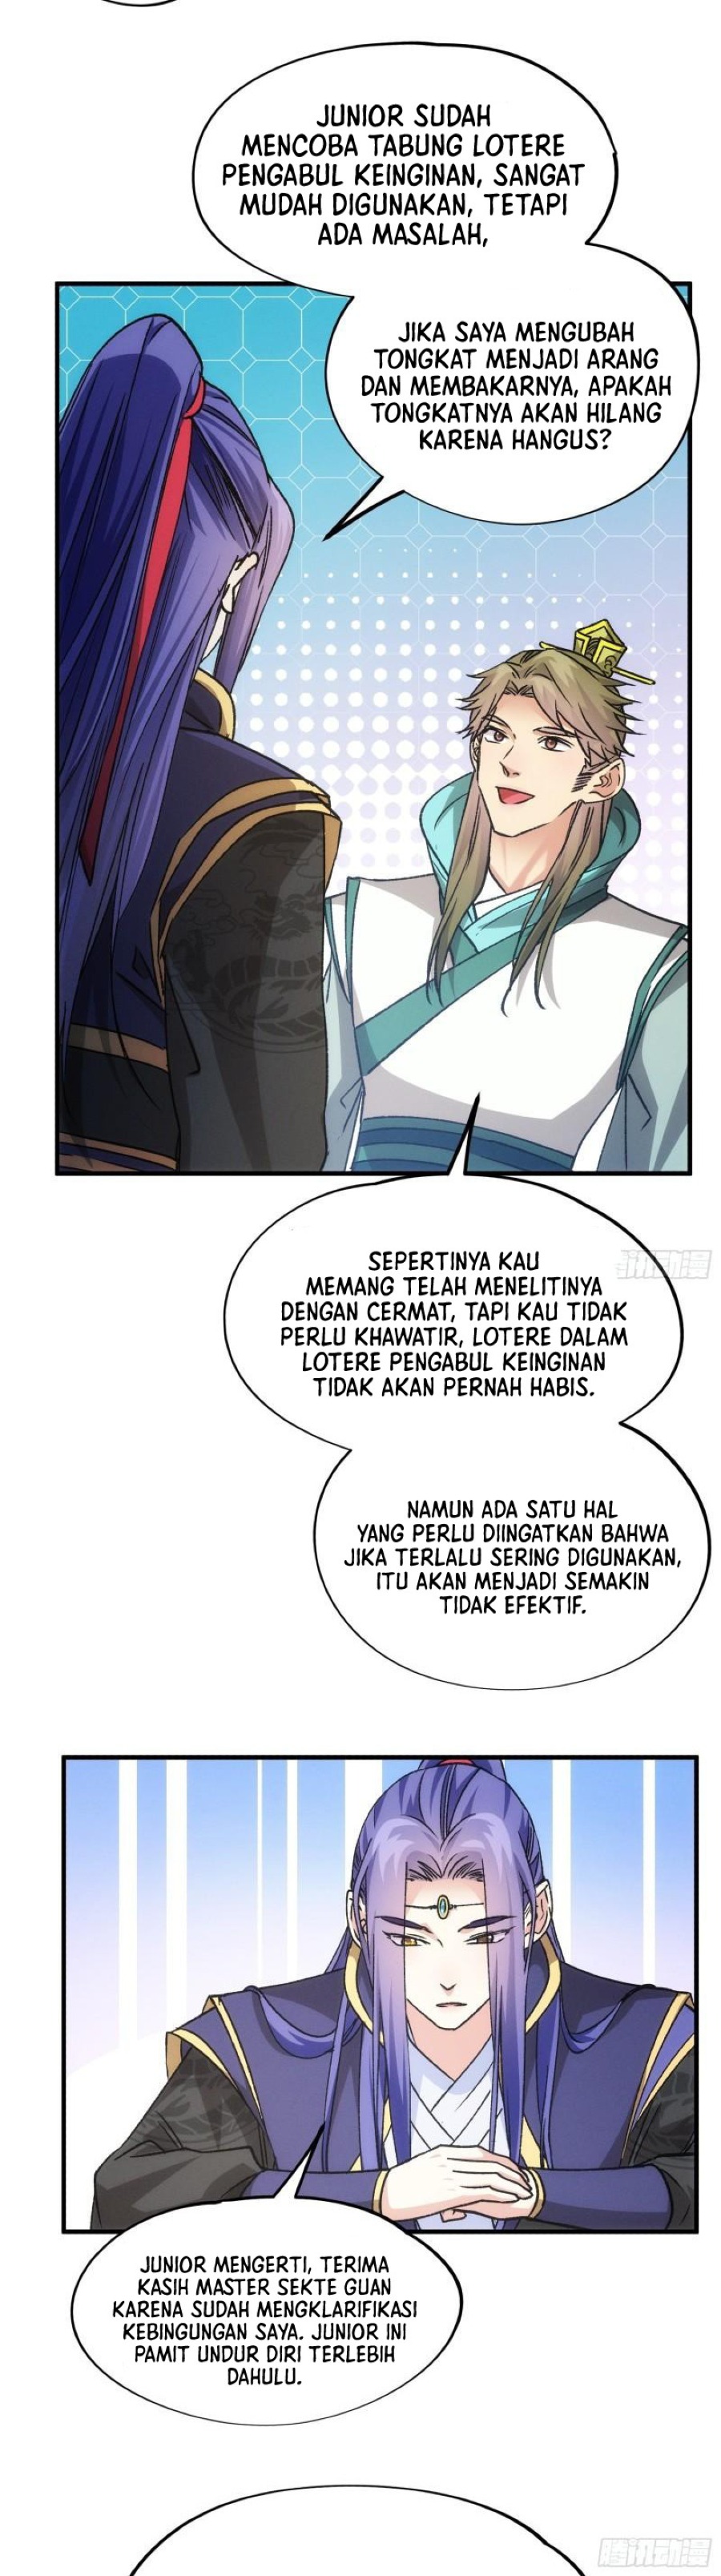 Dilarang COPAS - situs resmi www.mangacanblog.com - Komik i just dont play the card according to the routine 103 - chapter 103 104 Indonesia i just dont play the card according to the routine 103 - chapter 103 Terbaru 6|Baca Manga Komik Indonesia|Mangacan